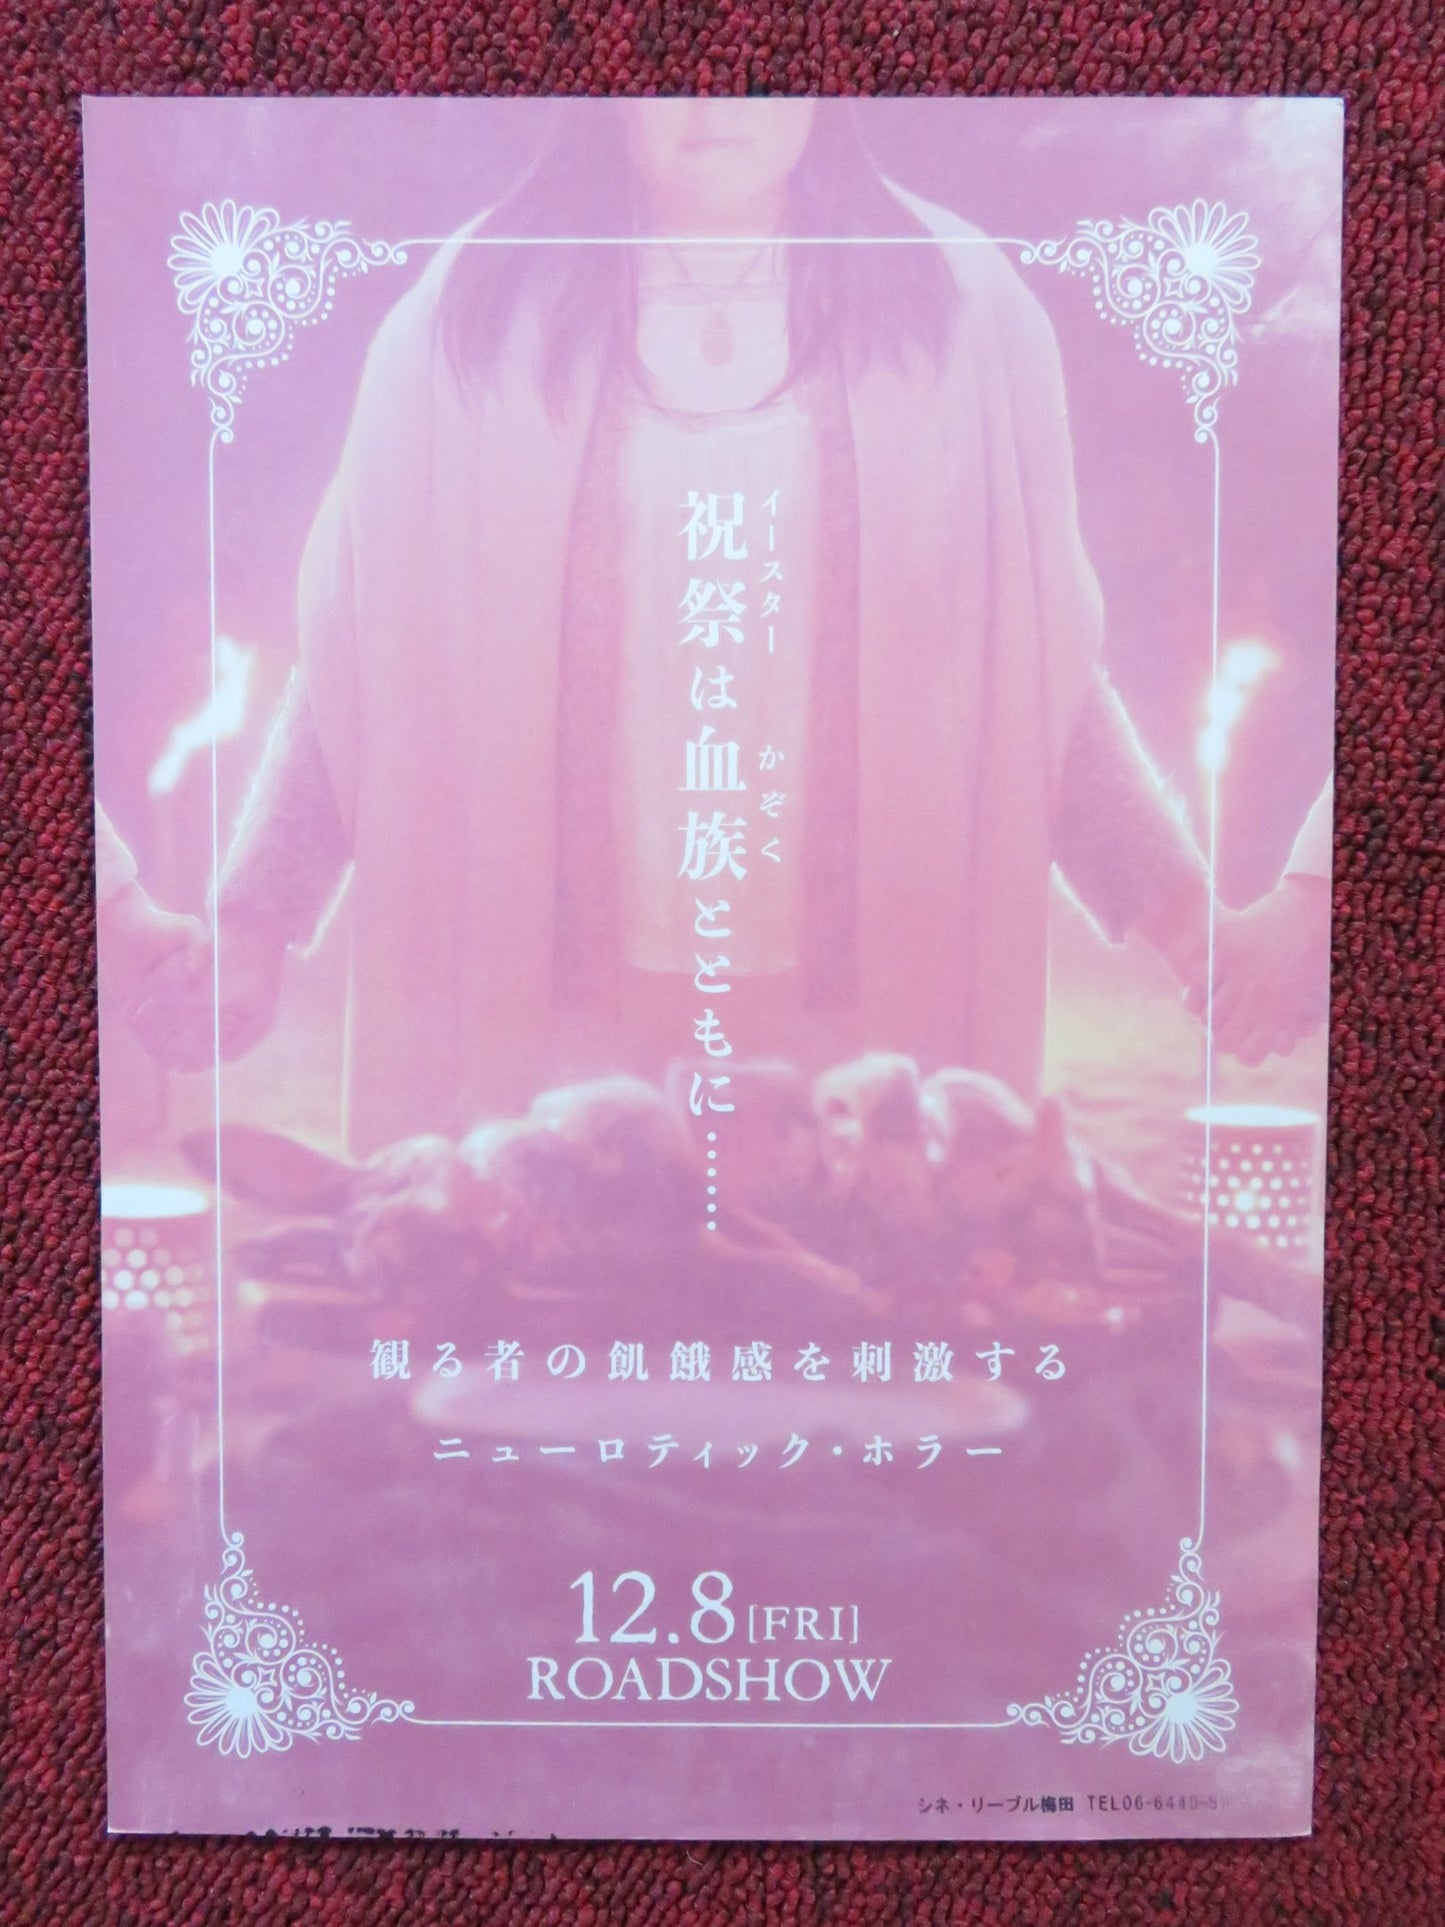 FAMILY DINNER - A JAPANESE CHIRASHI (B5) POSTER PIA HIERZEGGER MICHAEL PINK 2022